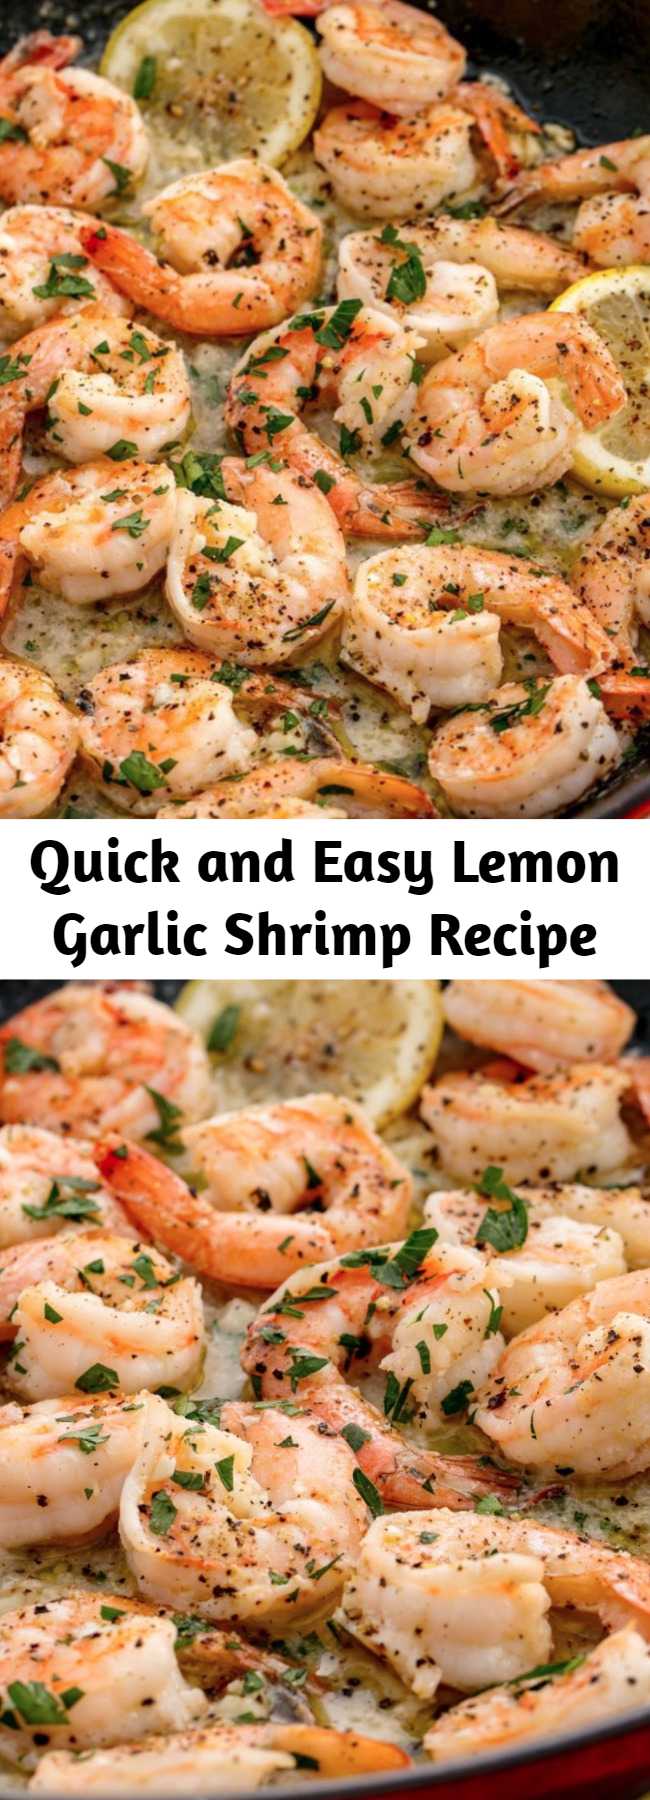 Quick and Easy Lemon Garlic Shrimp Recipe - This Lemon Garlic Shrimp is your dinner tonight. It's ready in 15 minutes or less, and it will be the fastest meal you make all week.